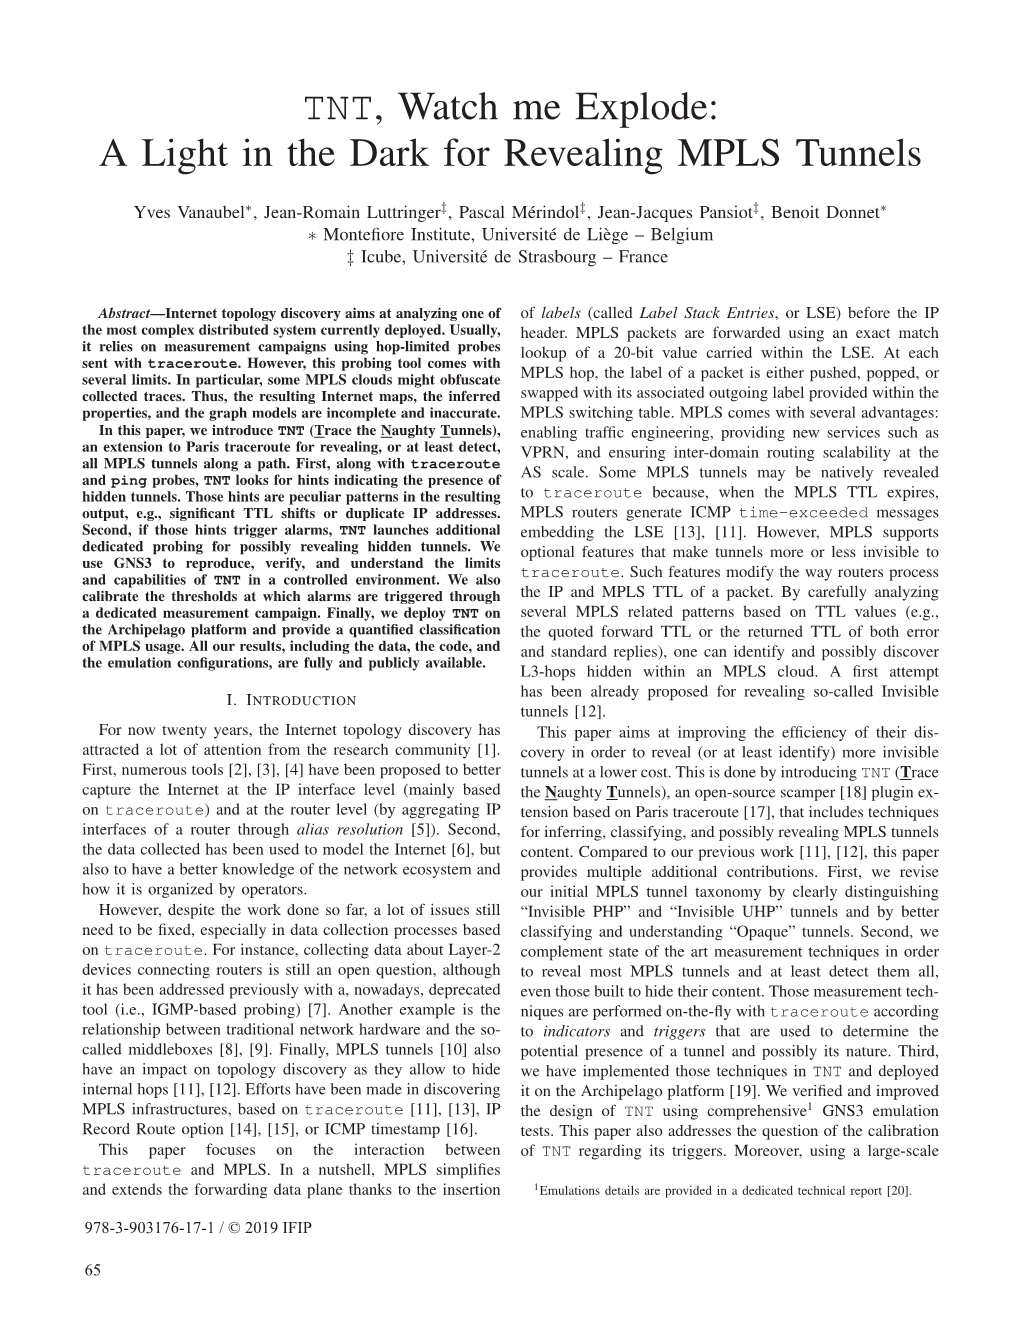 A Light in the Dark for Revealing MPLS Tunnels (Best Paper Award)